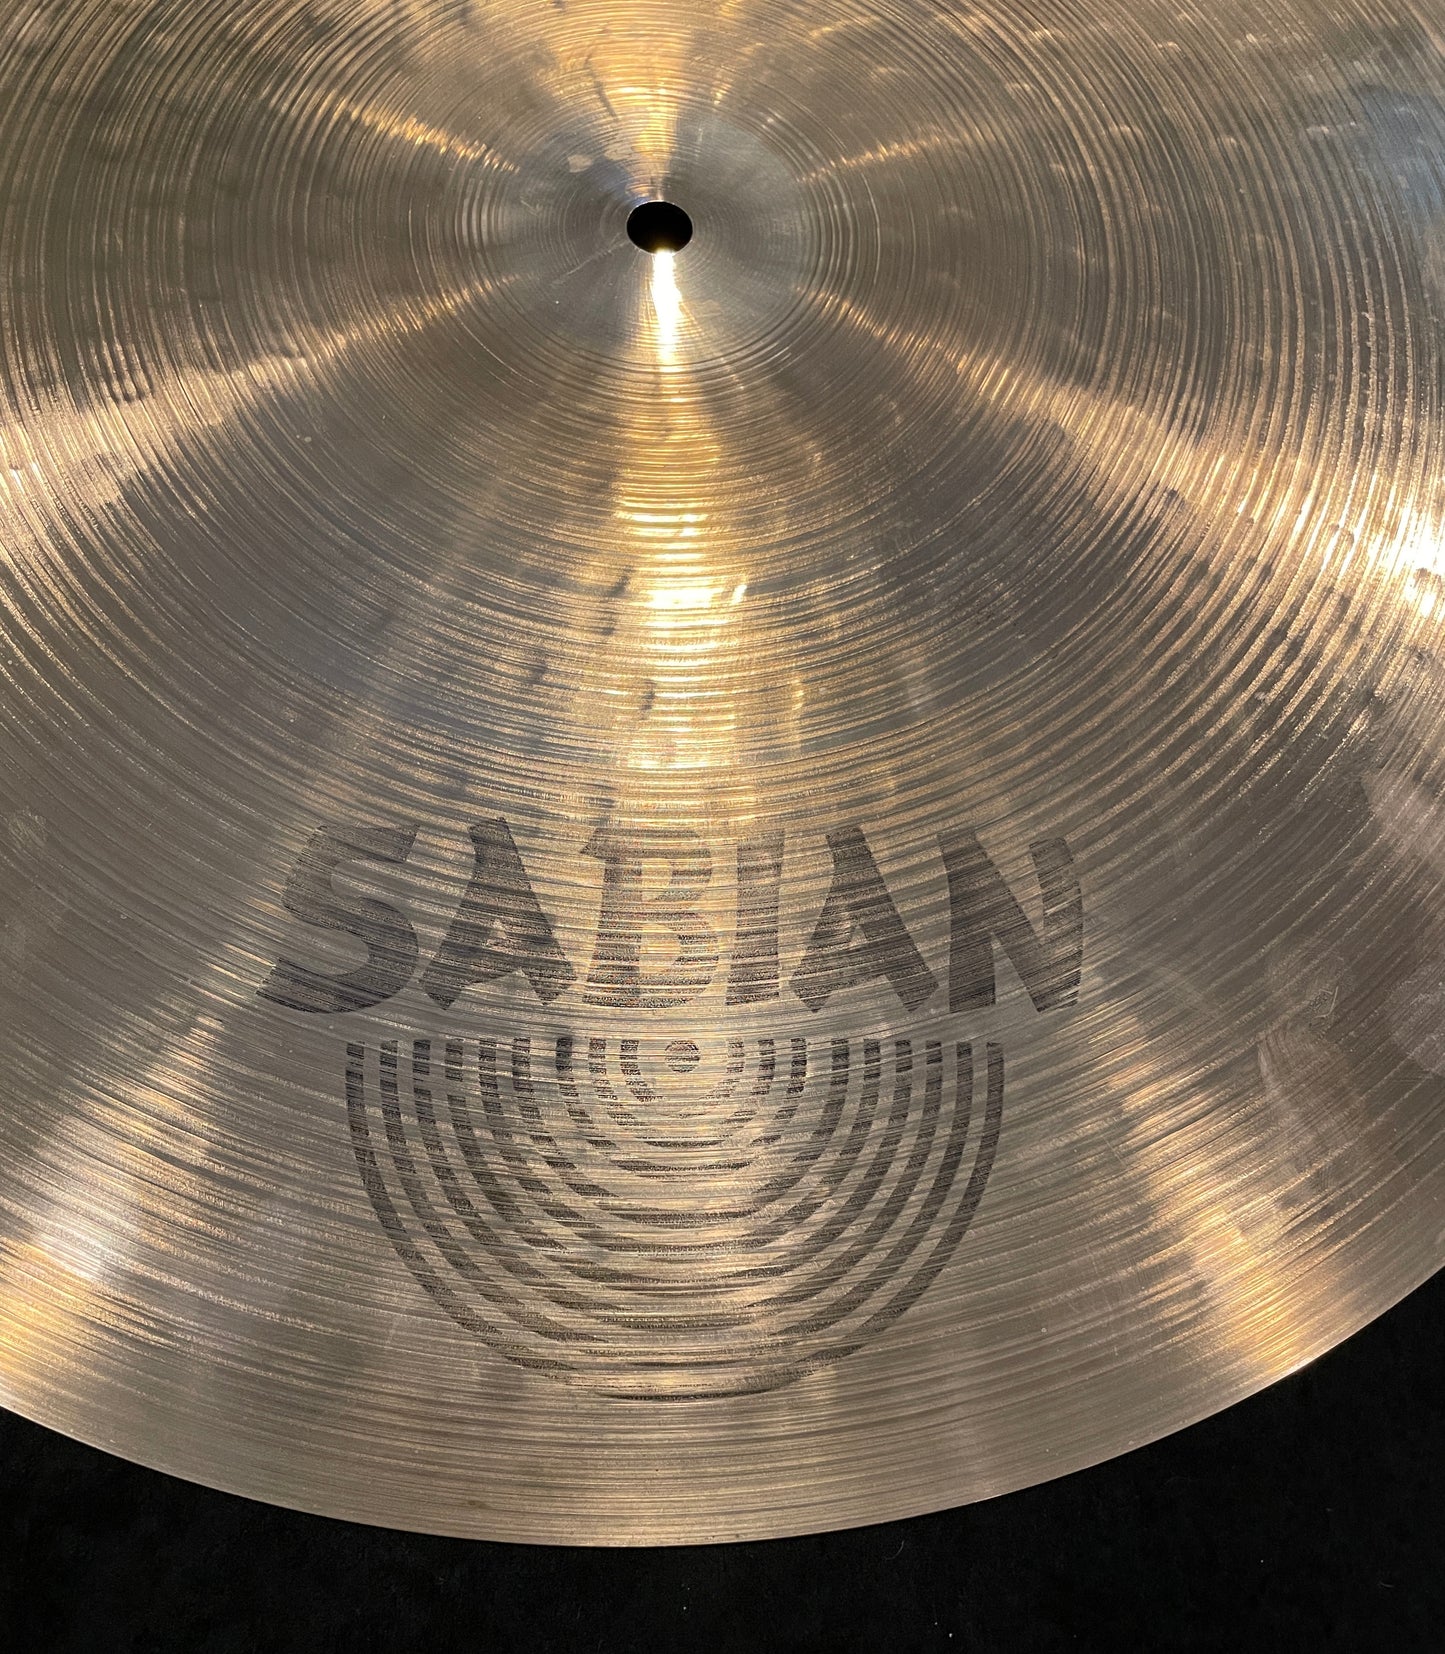 20" Sabian Hand Hammered HH Flat Bell Ride Cymbal 2364g